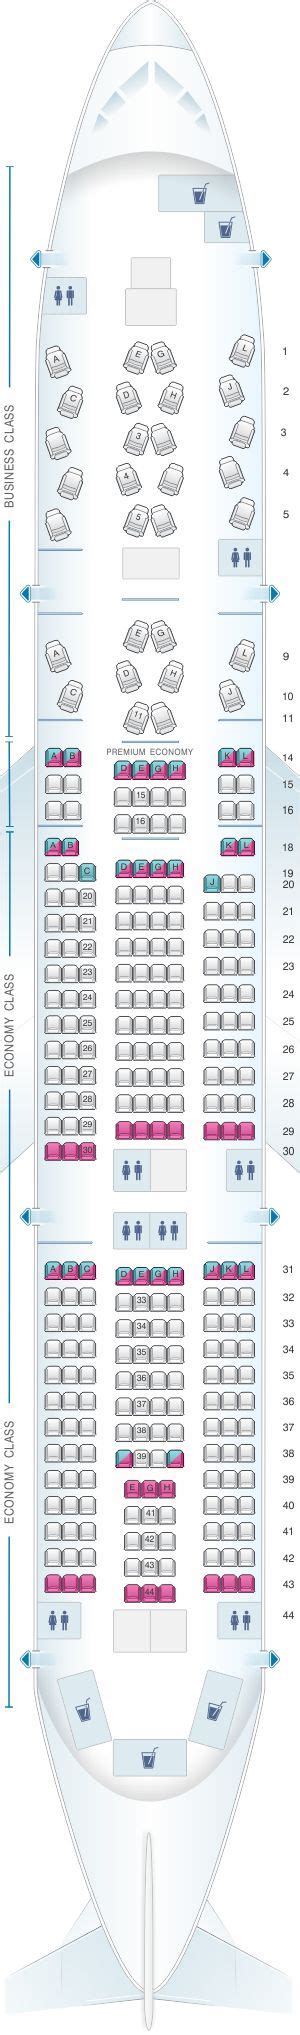 Seat Map Alitalia Airlines Air One Boeing B777 200ER con imágenes